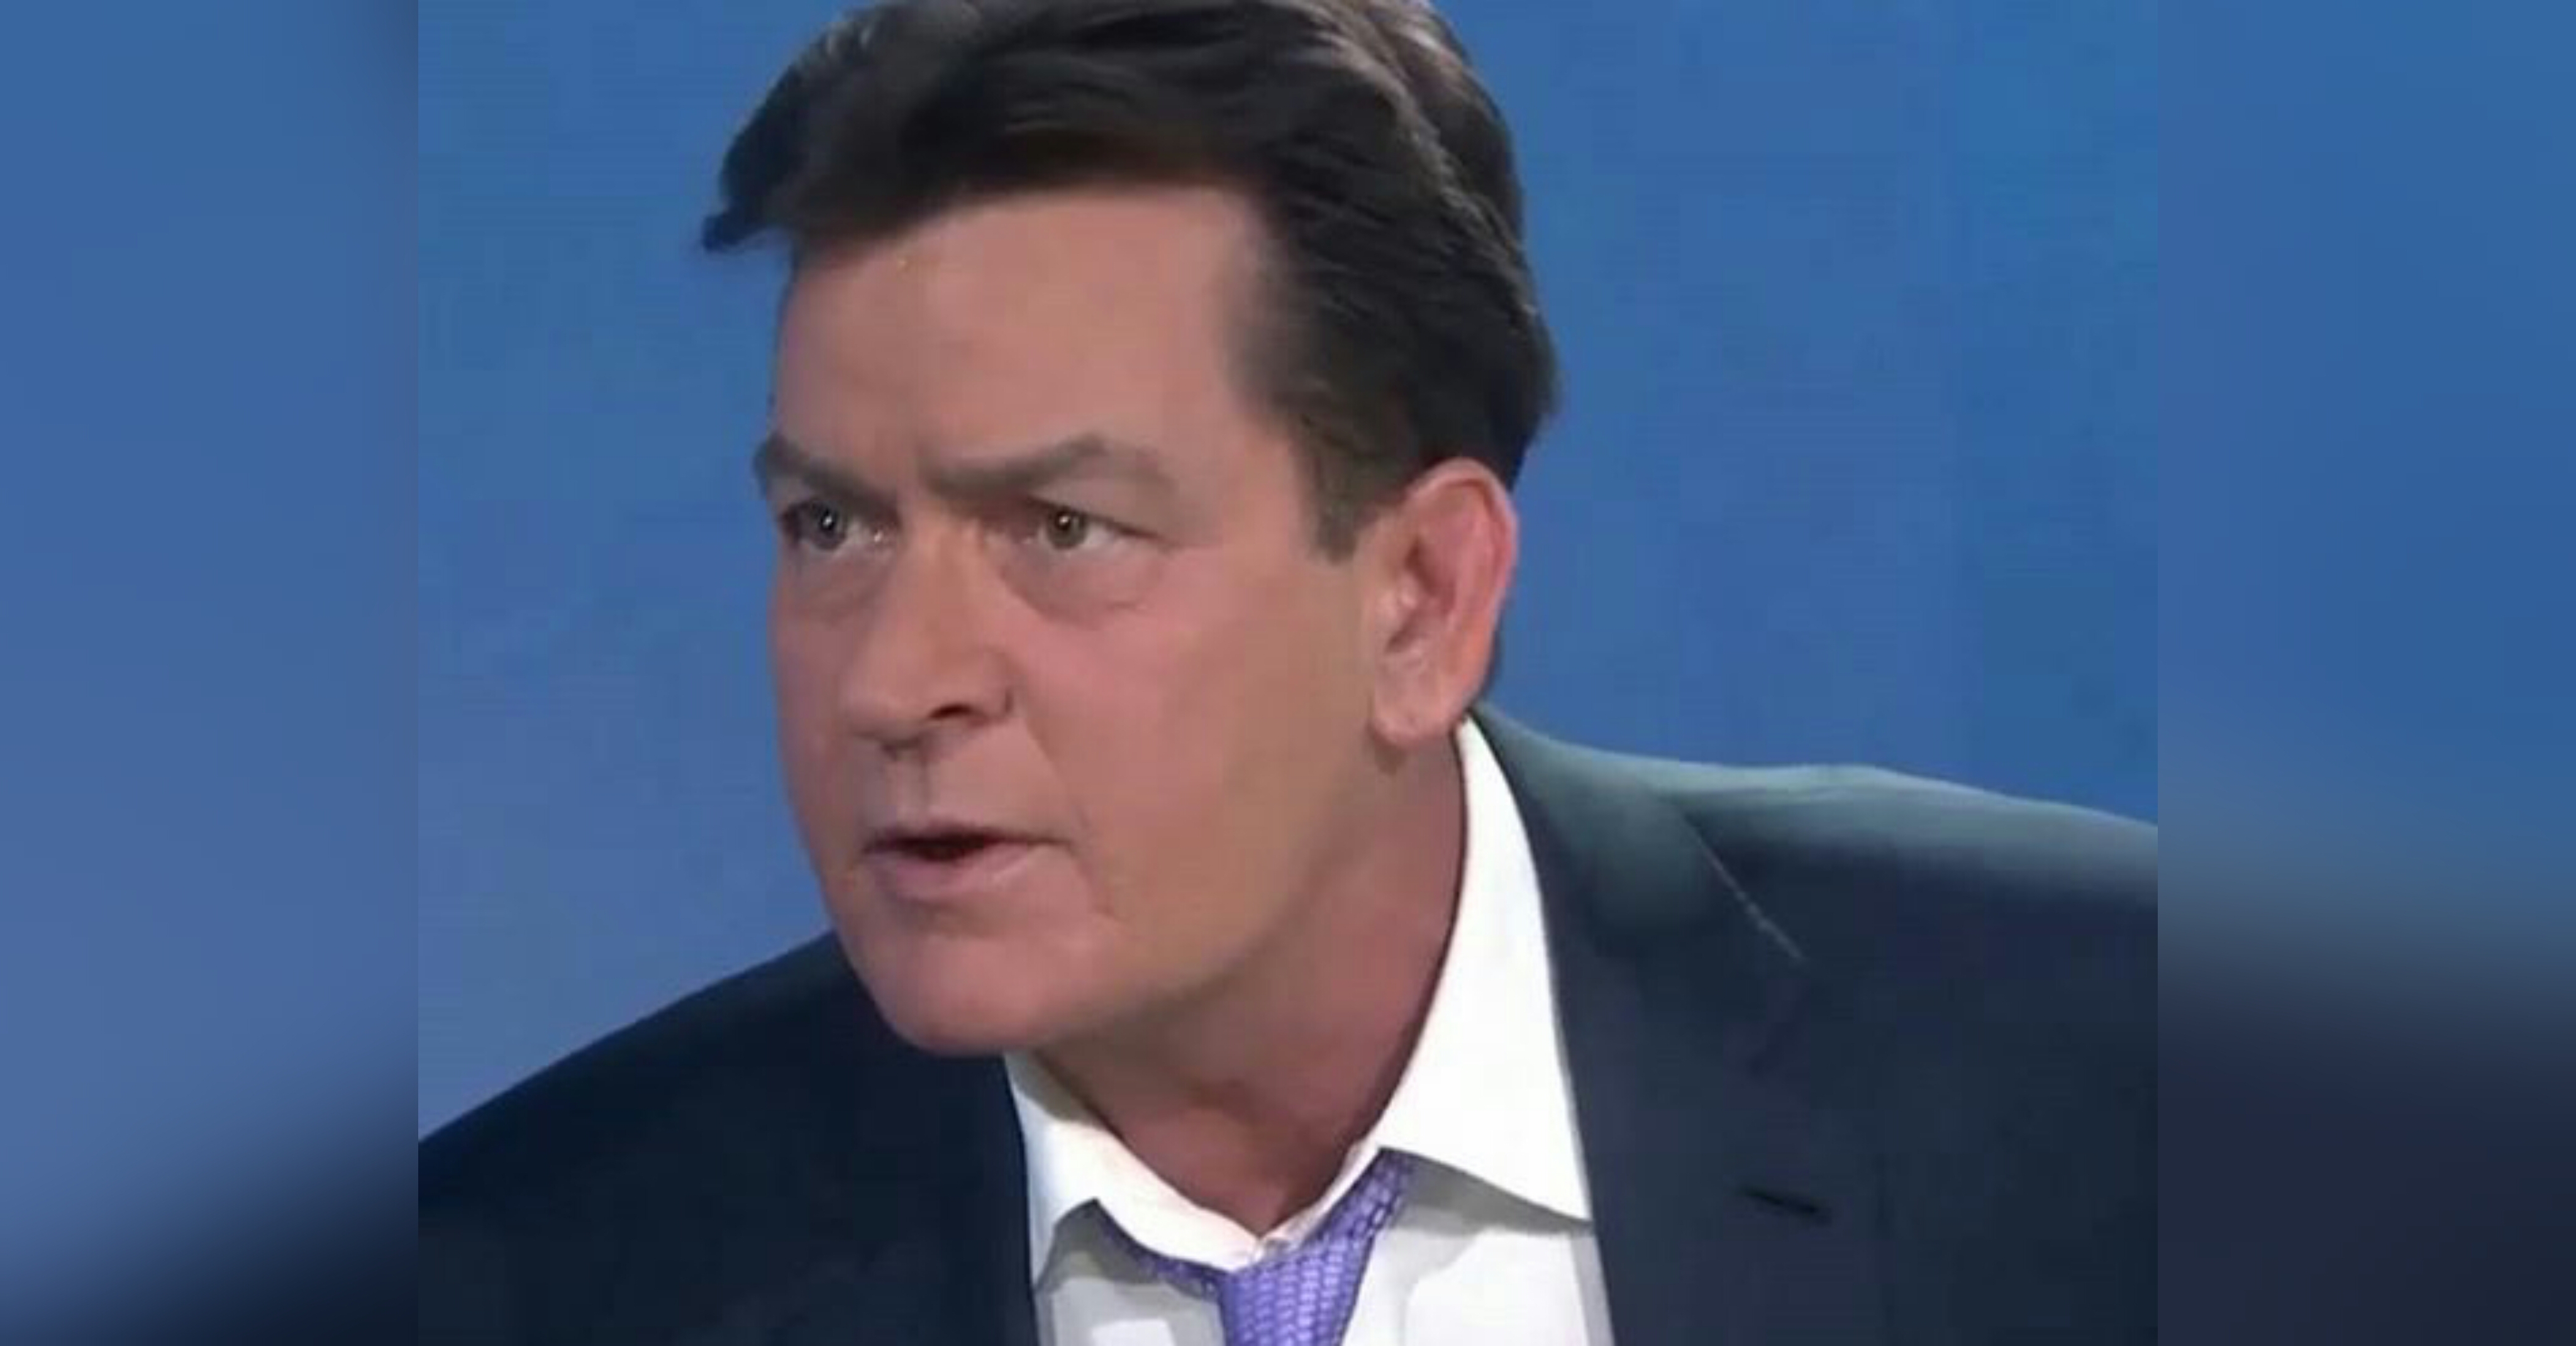 Charlie Sheen “i M Hiv Positive And I Still Have